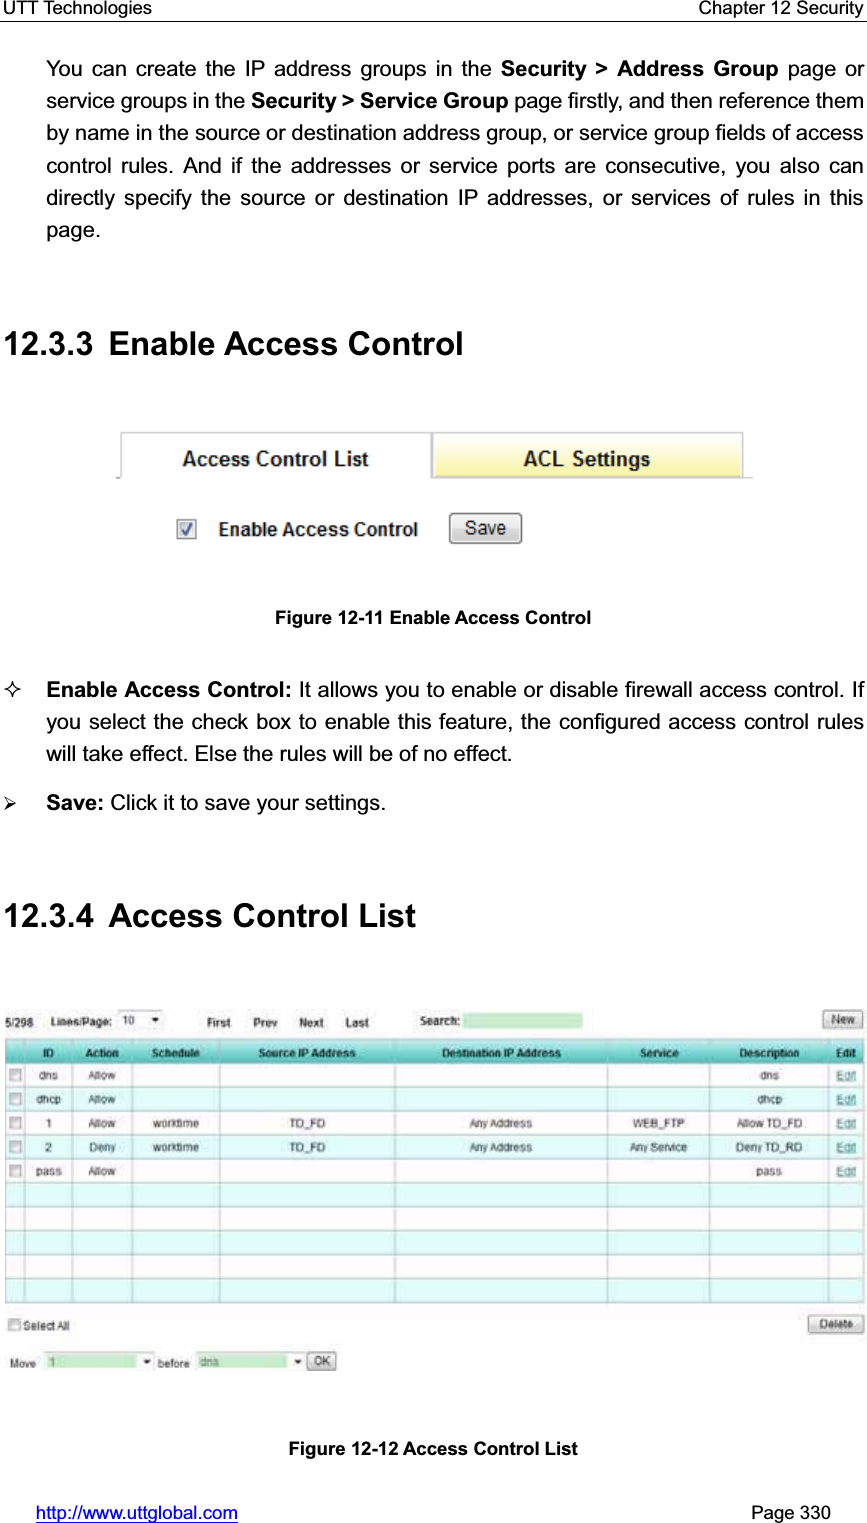 UTT Technologies    Chapter 12 Security   http://www.uttglobal.com                                                       Page 330 You can create the IP address groups in the Security &gt; Address Group page or service groups in the Security &gt; Service Group page firstly, and then reference them by name in the source or destination address group, or service group fields of access control rules. And if the addresses or service ports are consecutive, you also can directly specify the source or destination IP addresses, or services of rules in this page. 12.3.3 Enable Access Control Figure 12-11 Enable Access Control Enable Access Control: It allows you to enable or disable firewall access control. If you select the check box to enable this feature, the configured access control rules will take effect. Else the rules will be of no effect. ¾Save: Click it to save your settings.12.3.4  Access Control List Figure 12-12 Access Control List 